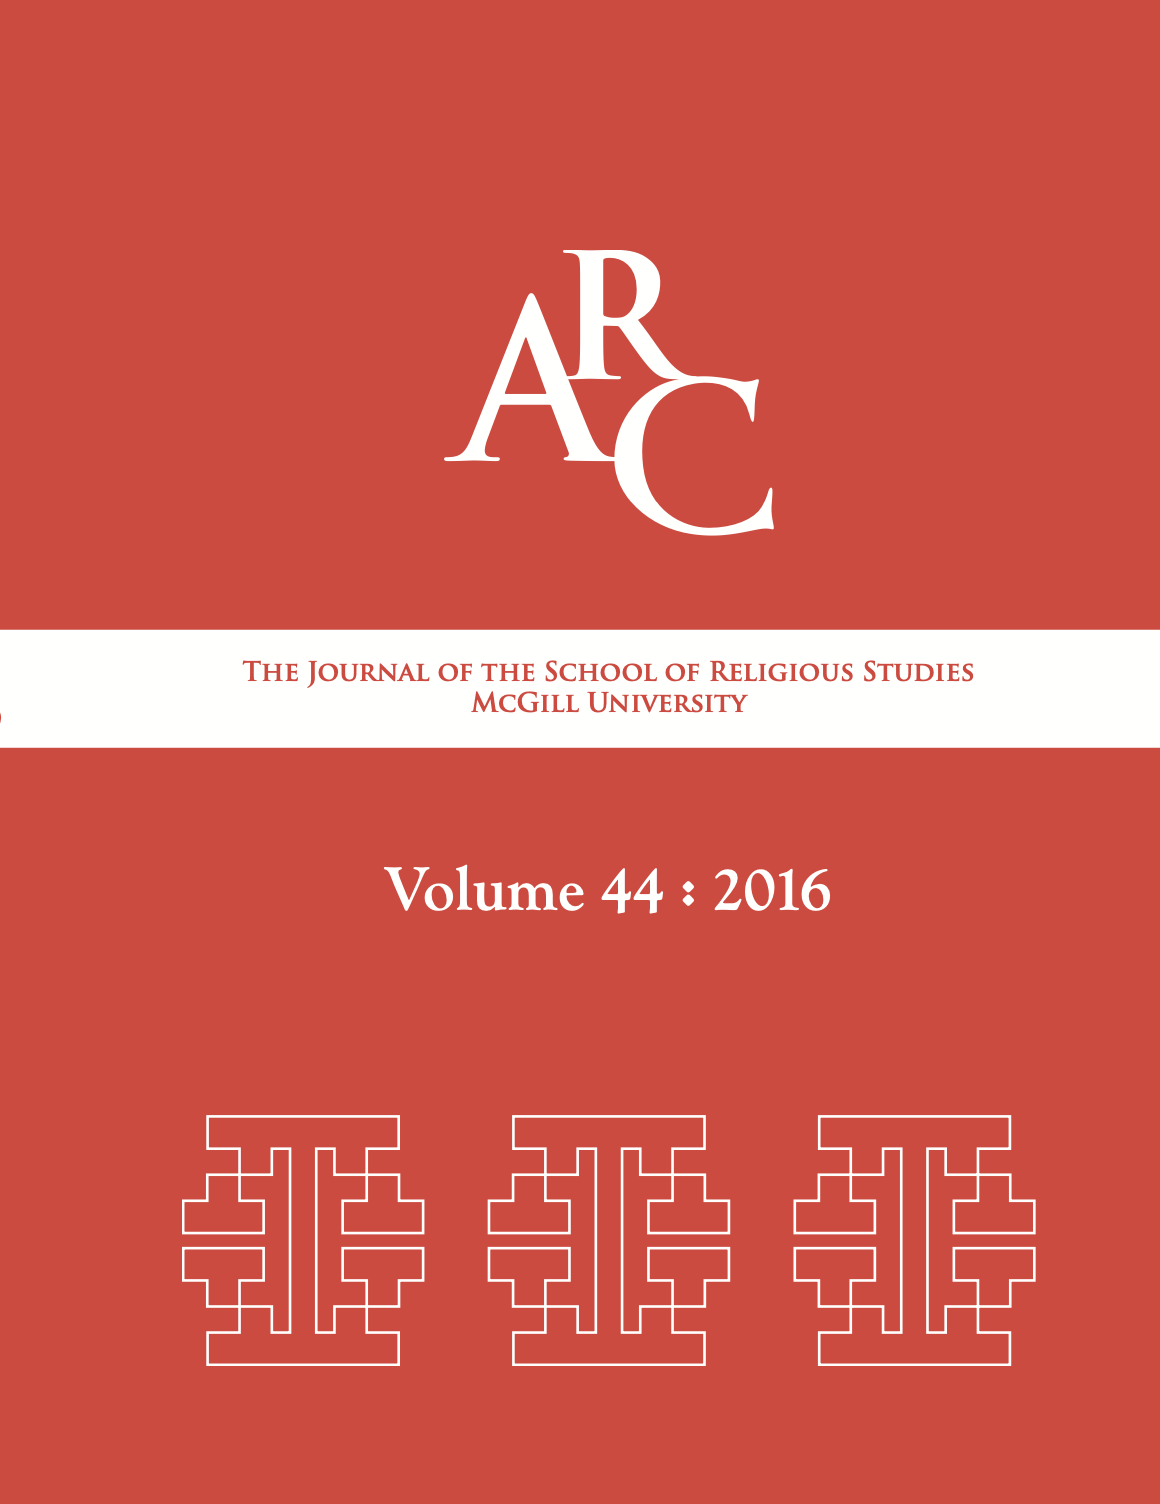 					View Vol. 44 (2016): Arc: The Journal of the School of Religious Studies
				